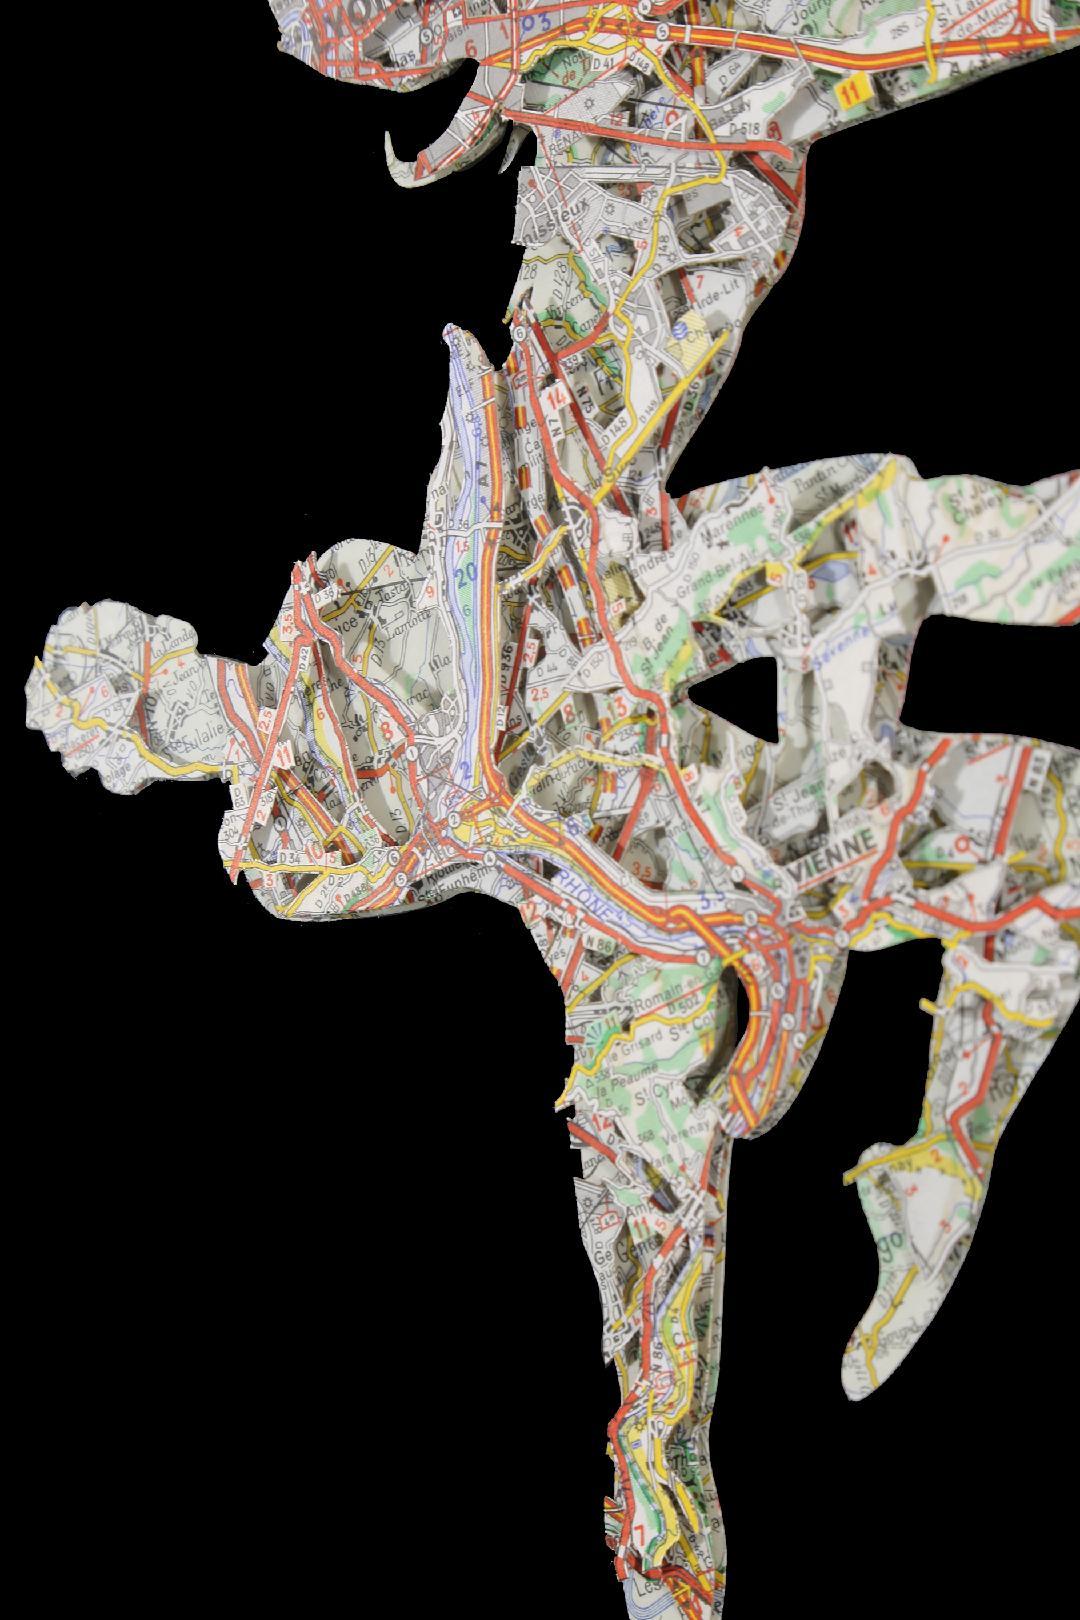 image embedded in layered glass.  Created with cutouts, maps
dancers, dancing art, maps, cutouts, cutout art.

Title : The Catch
Size :12x16
Date : 2018 Washington DC 